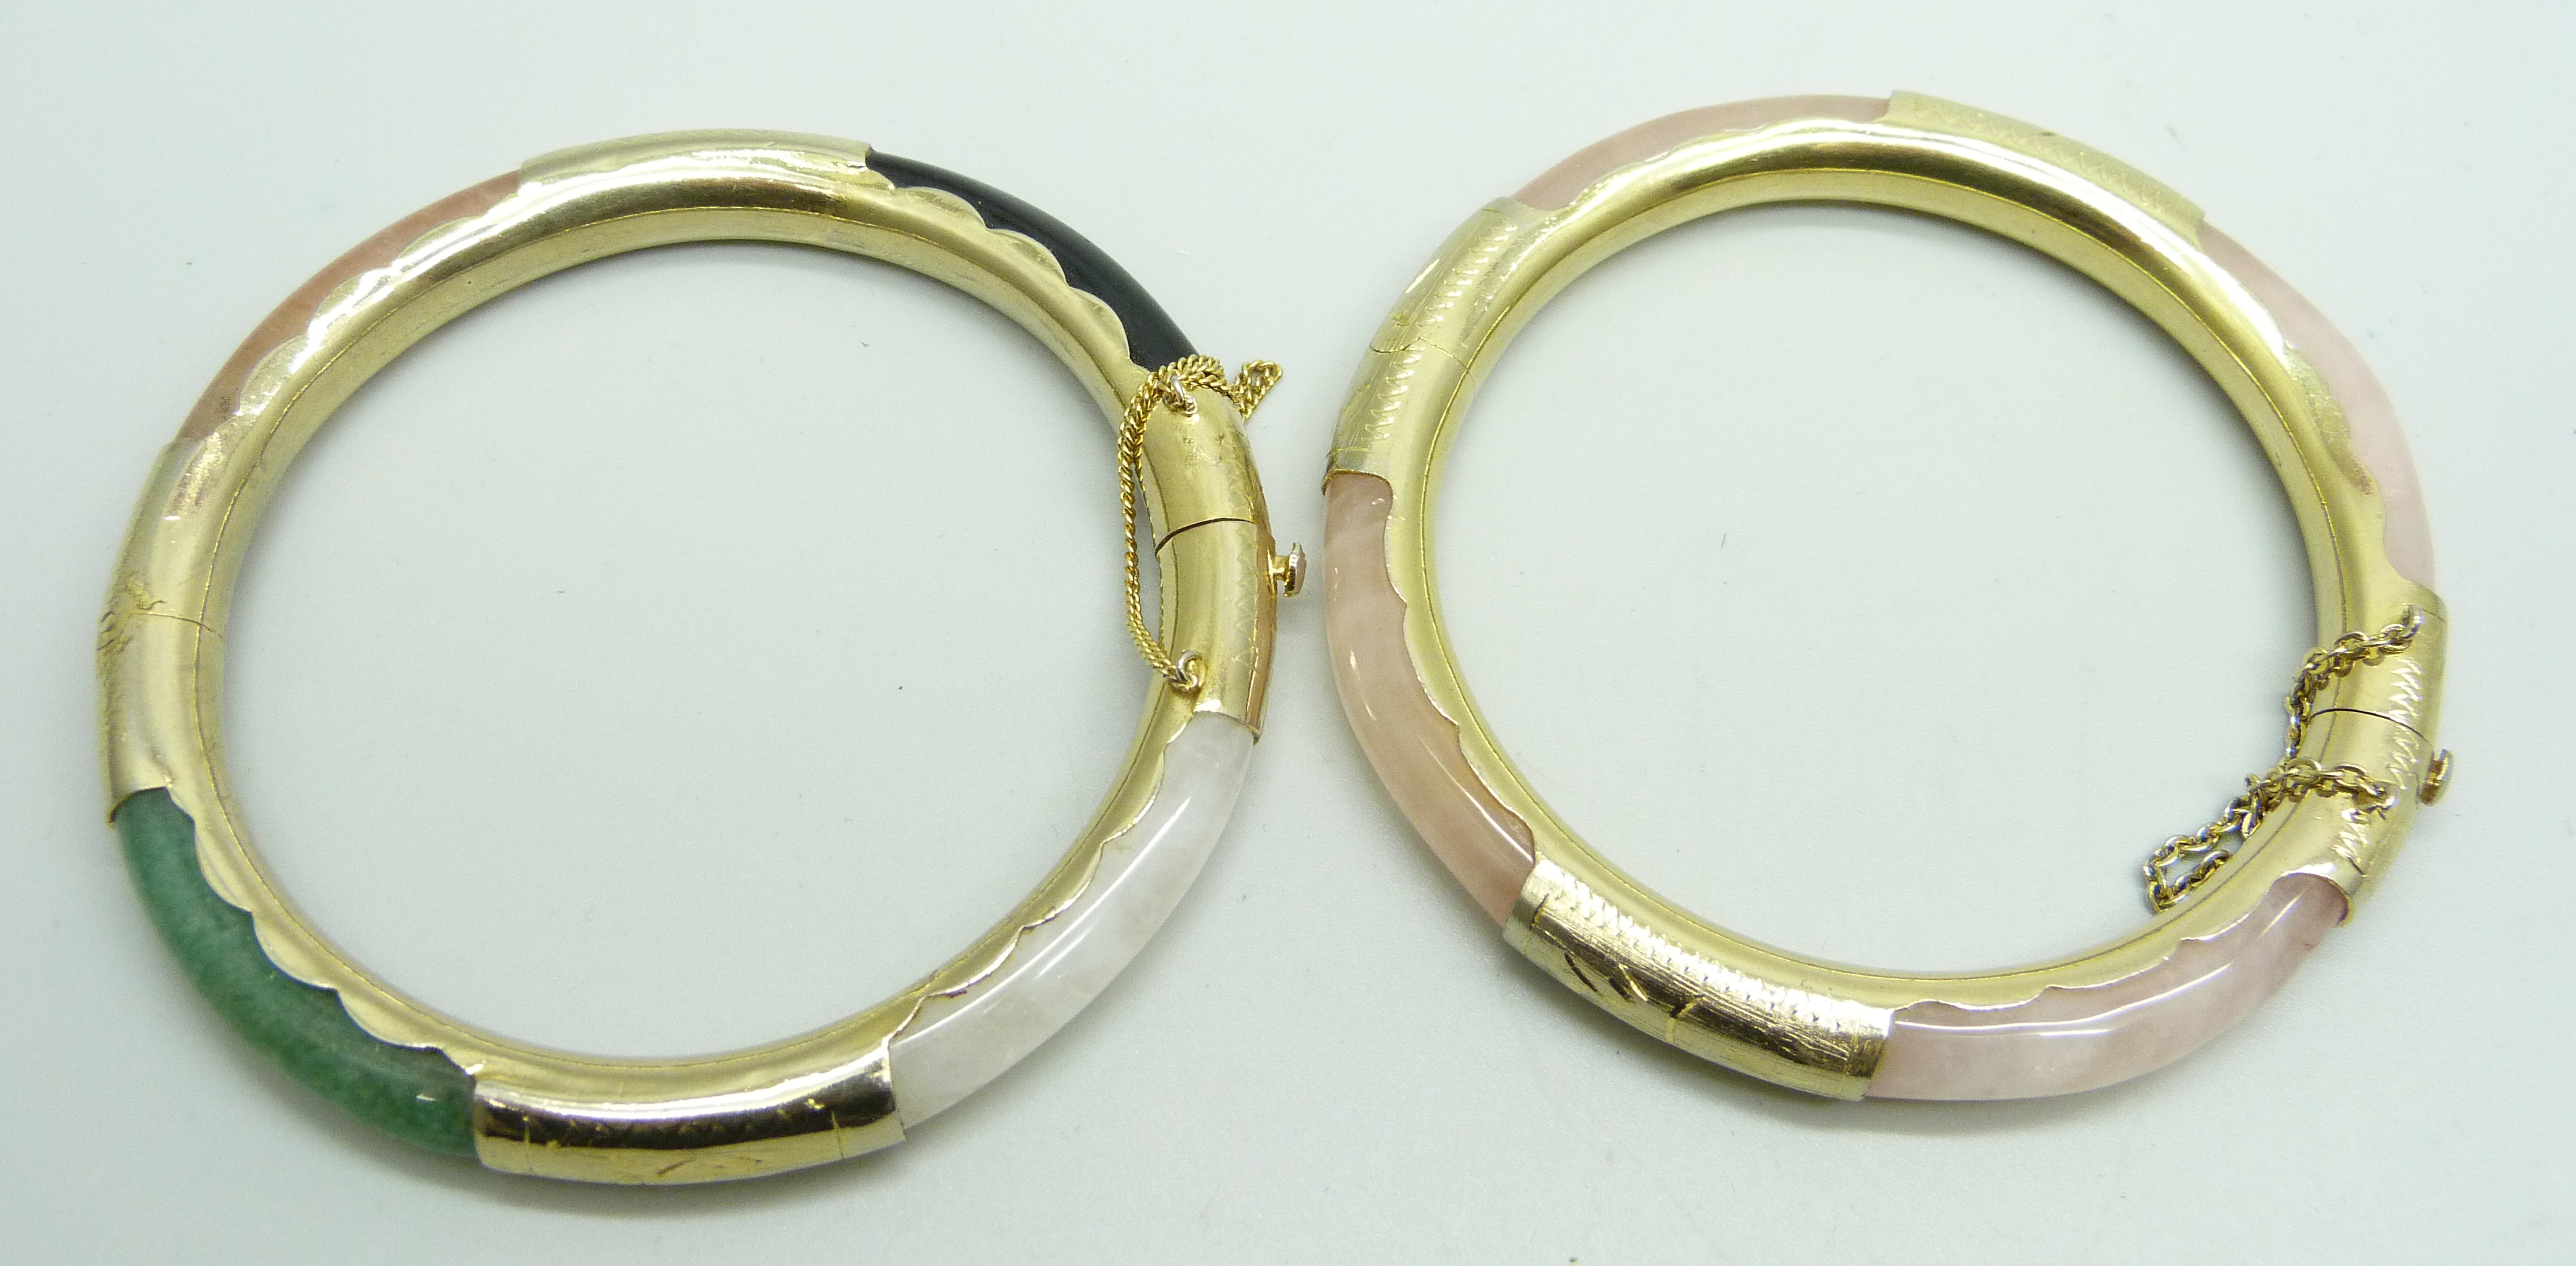 Two silver and jade bangles - Image 3 of 4